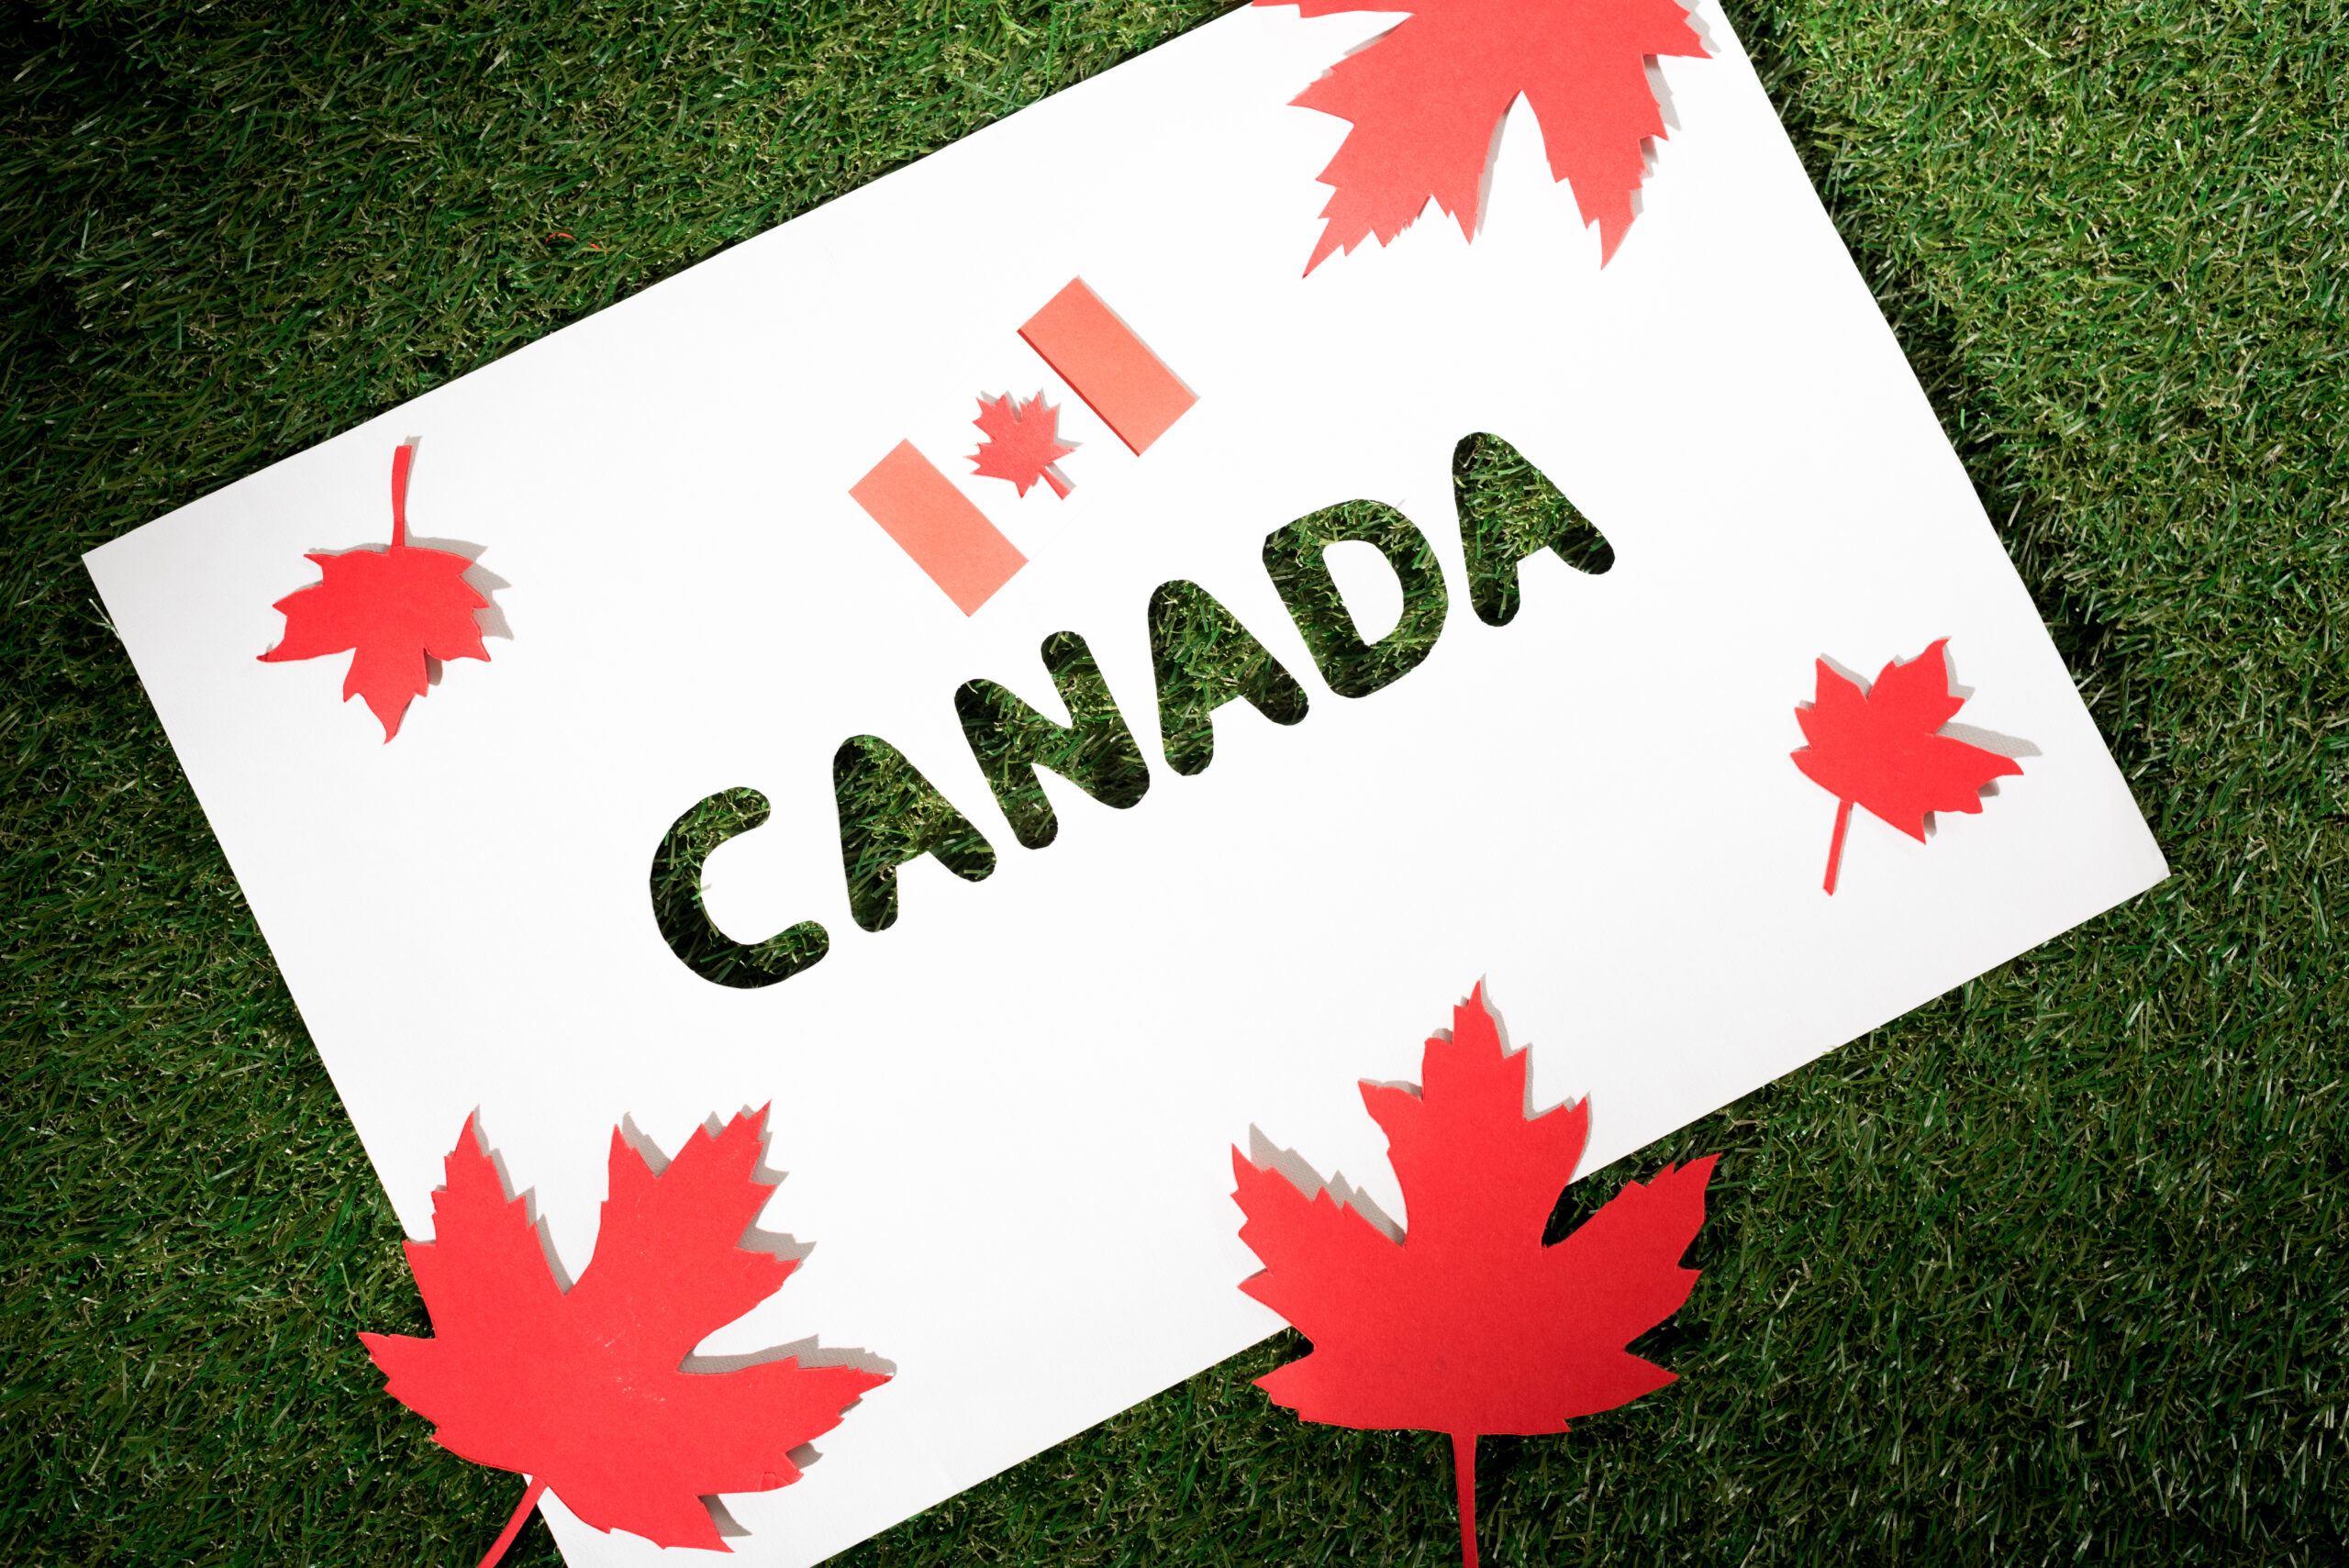 white board with cut out word 'canada' on green grass background  with maple leaves and canadian